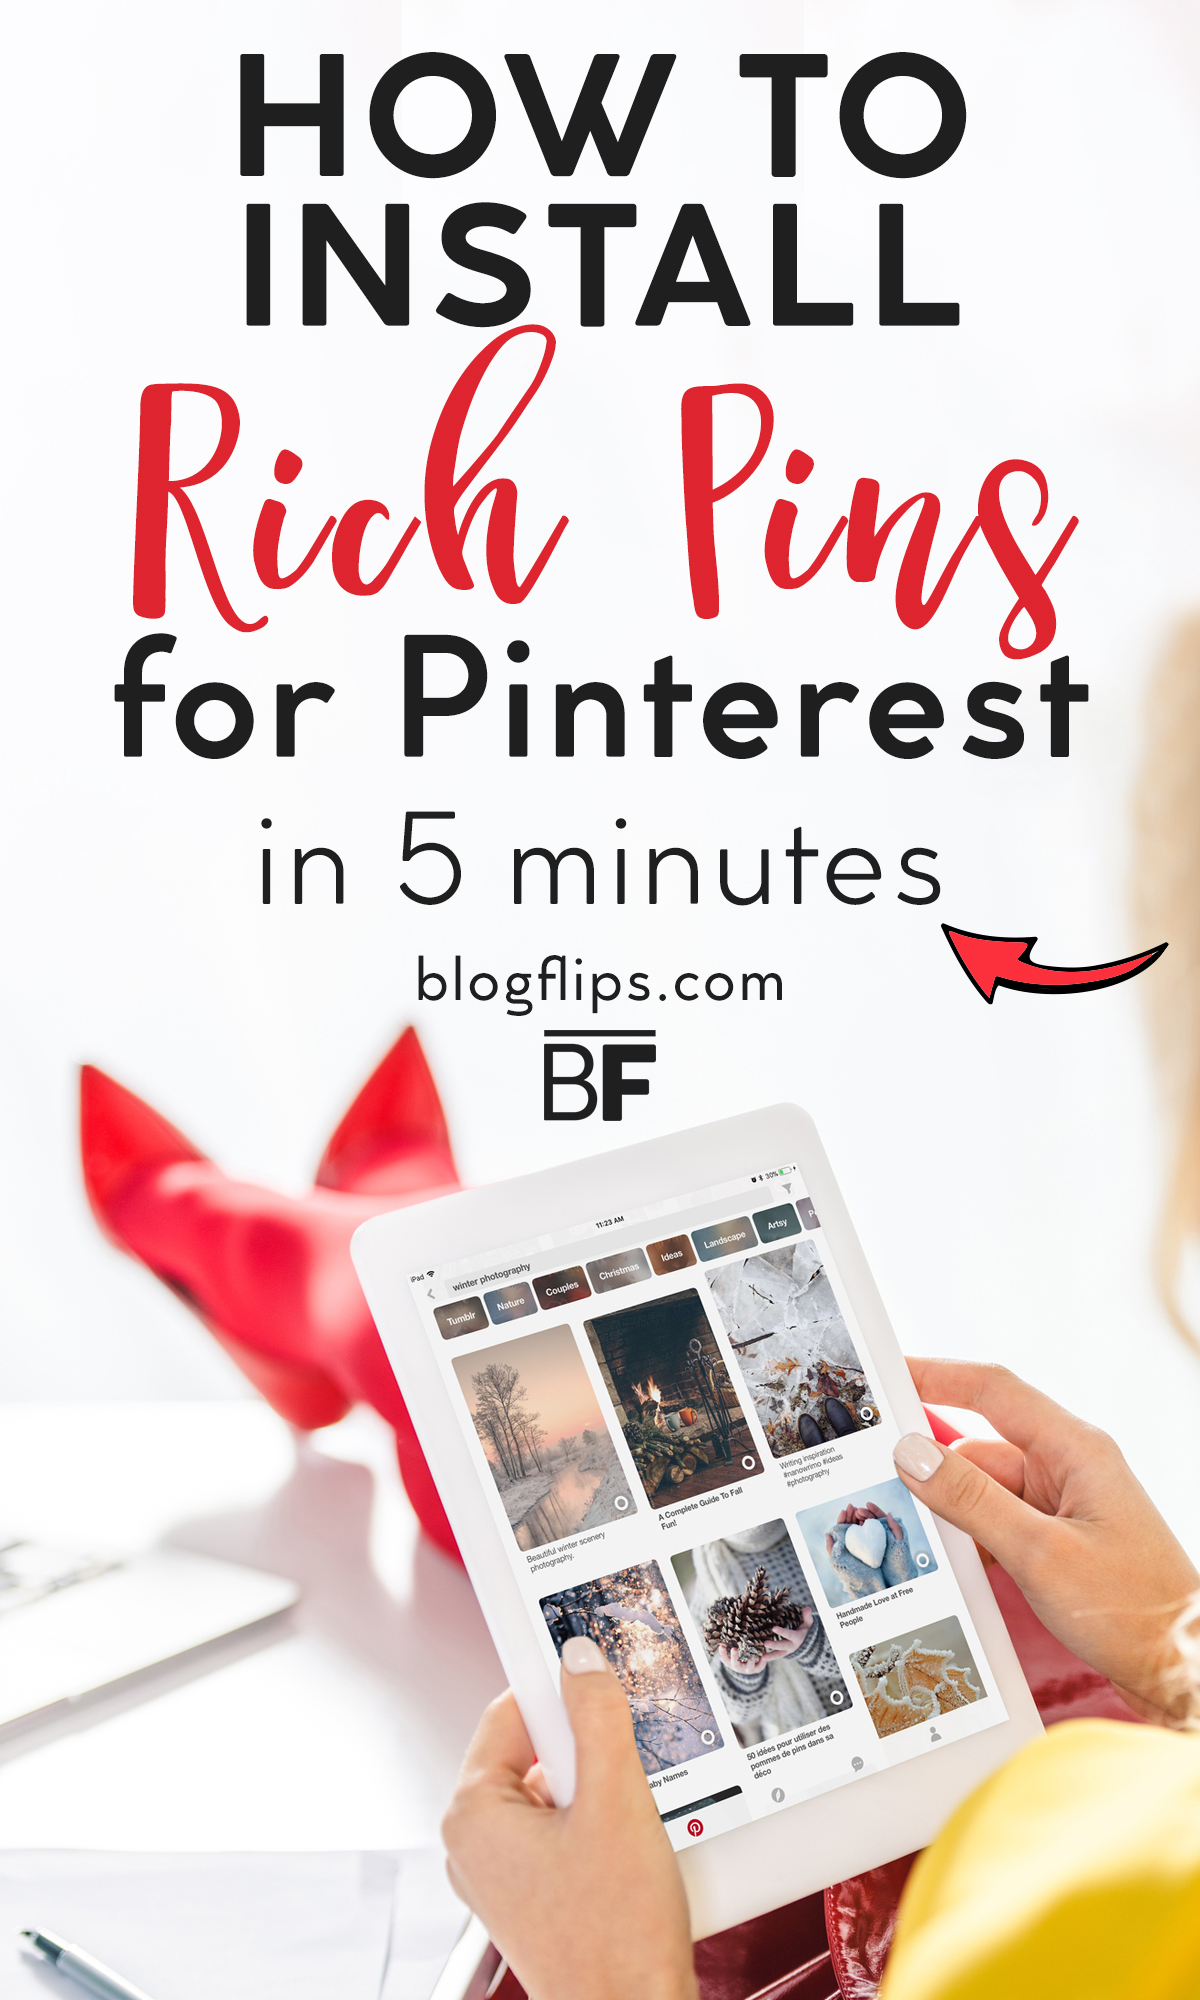 Learn how to install Rich Pins for Pinterest in 5 minutes! Rich Pins will help you display more information about your content to potential web visitors and ultimately help get you more blog traffic! #pinteresttips #richpins